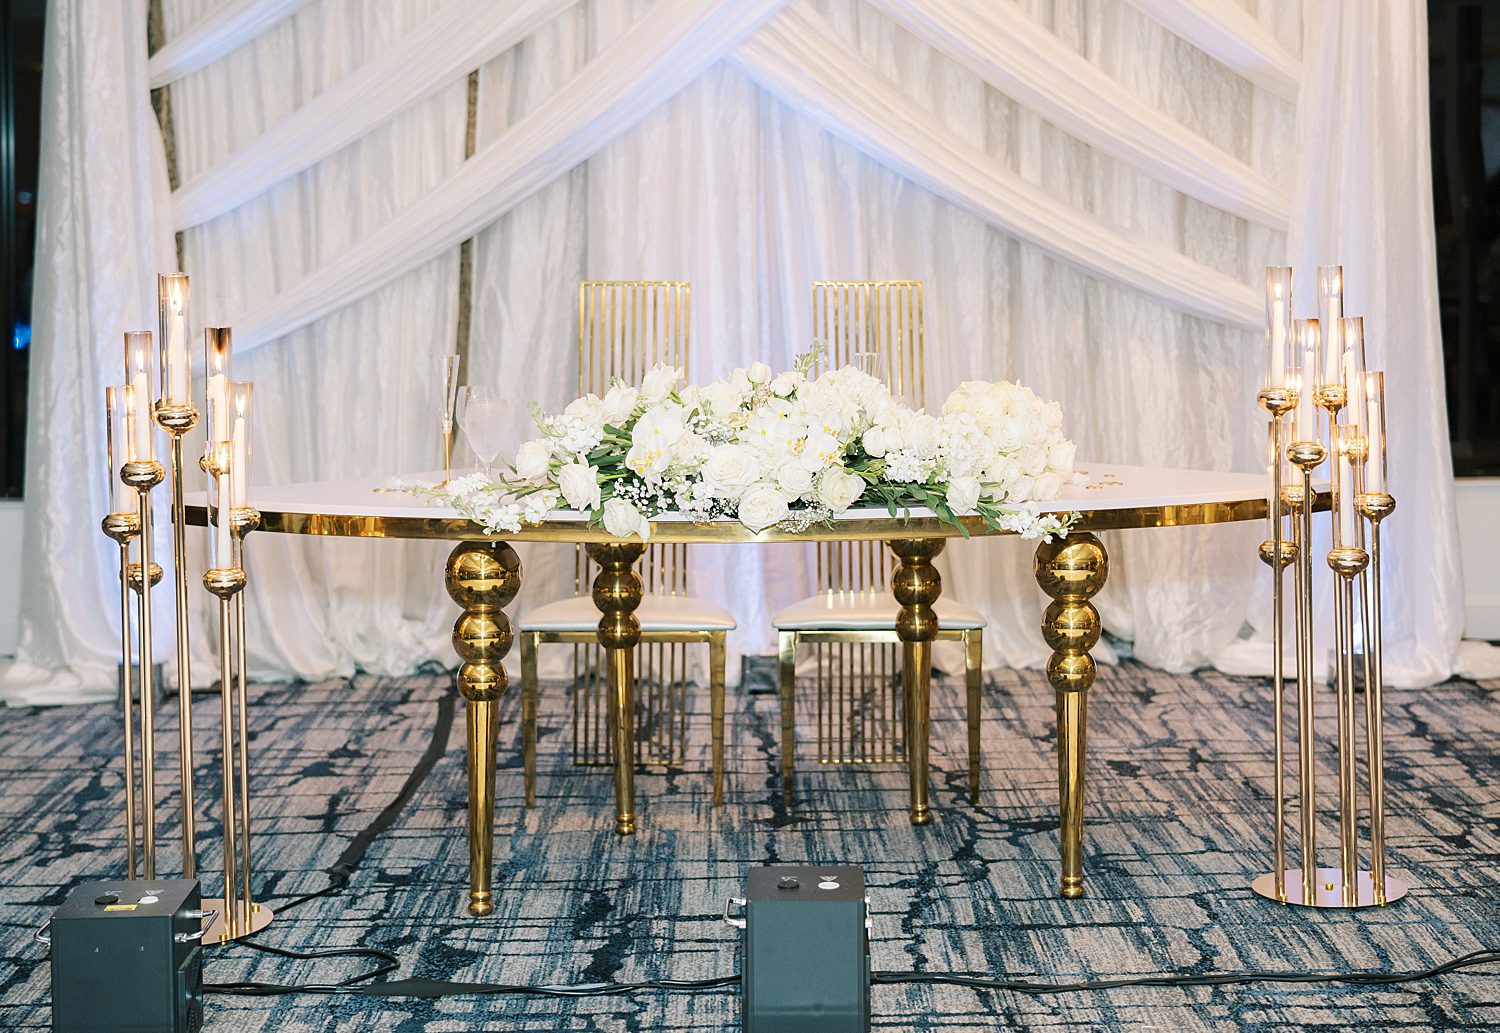 sweetheart table with candles and ivory flowers in center for Rusty Pelican Tampa wedding reception